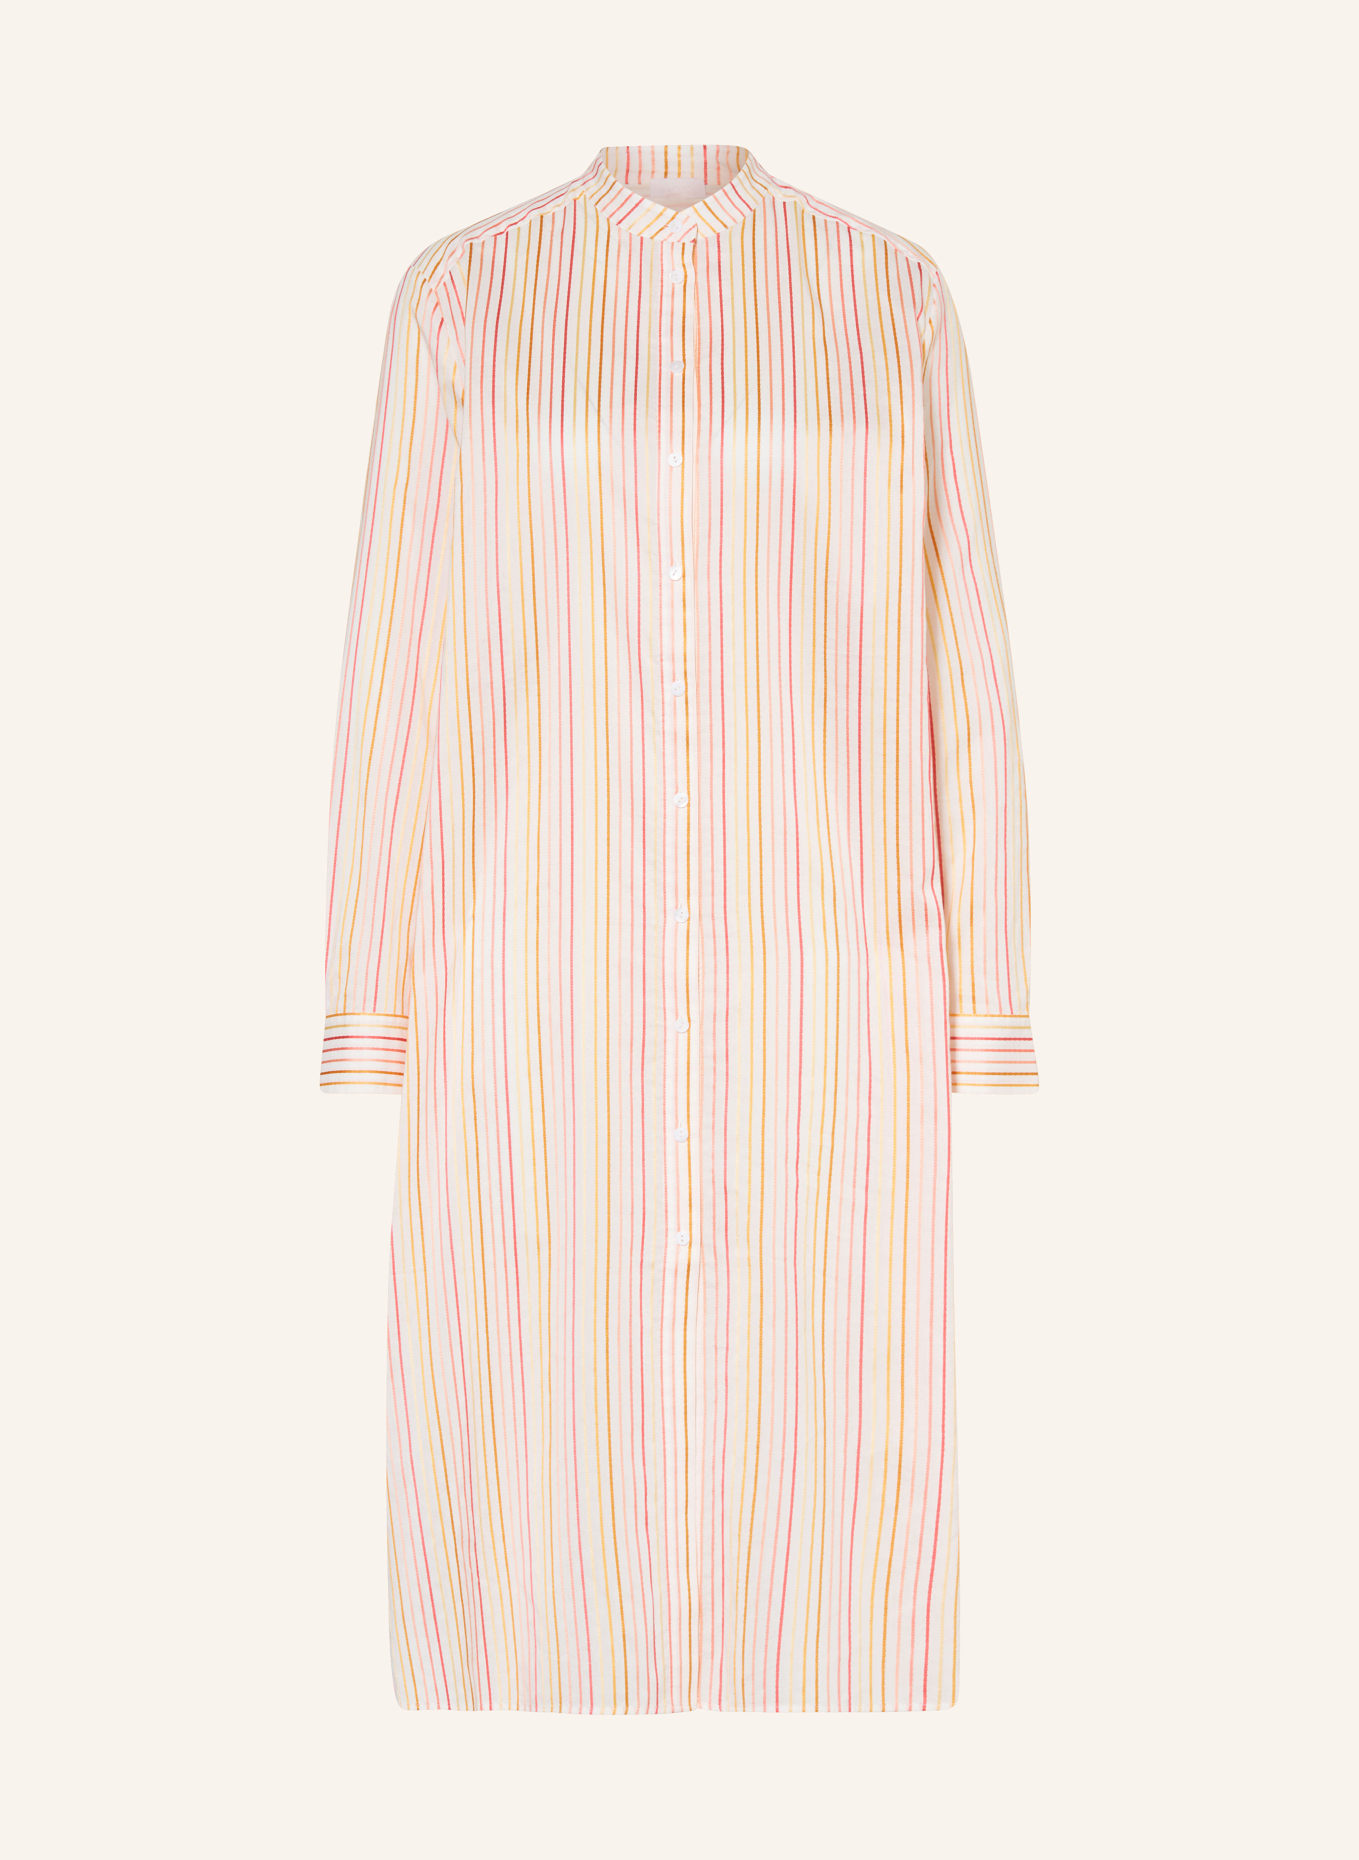 Lala Berlin Shirt dress DUNE, Color: WHITE/ RED/ YELLOW (Image 1)